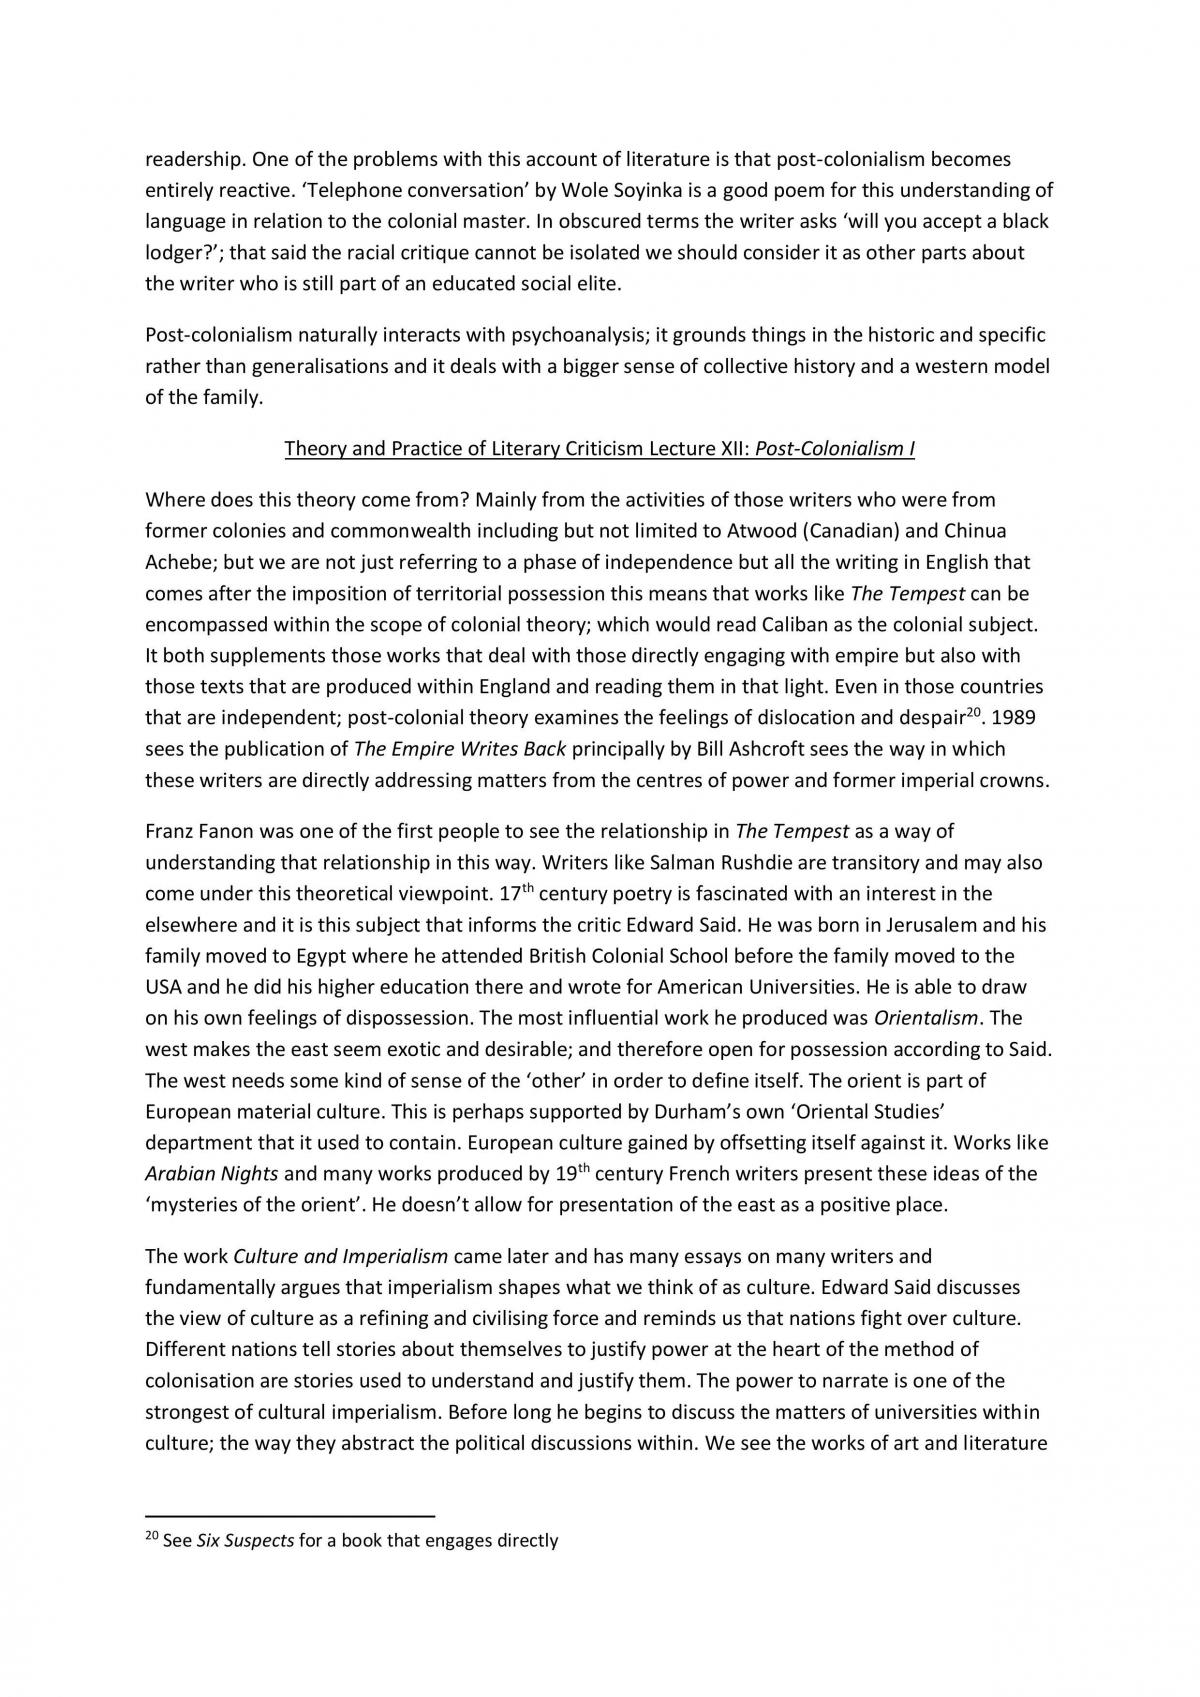 Literary Theory Lecture and Seminar Notes - Page 12